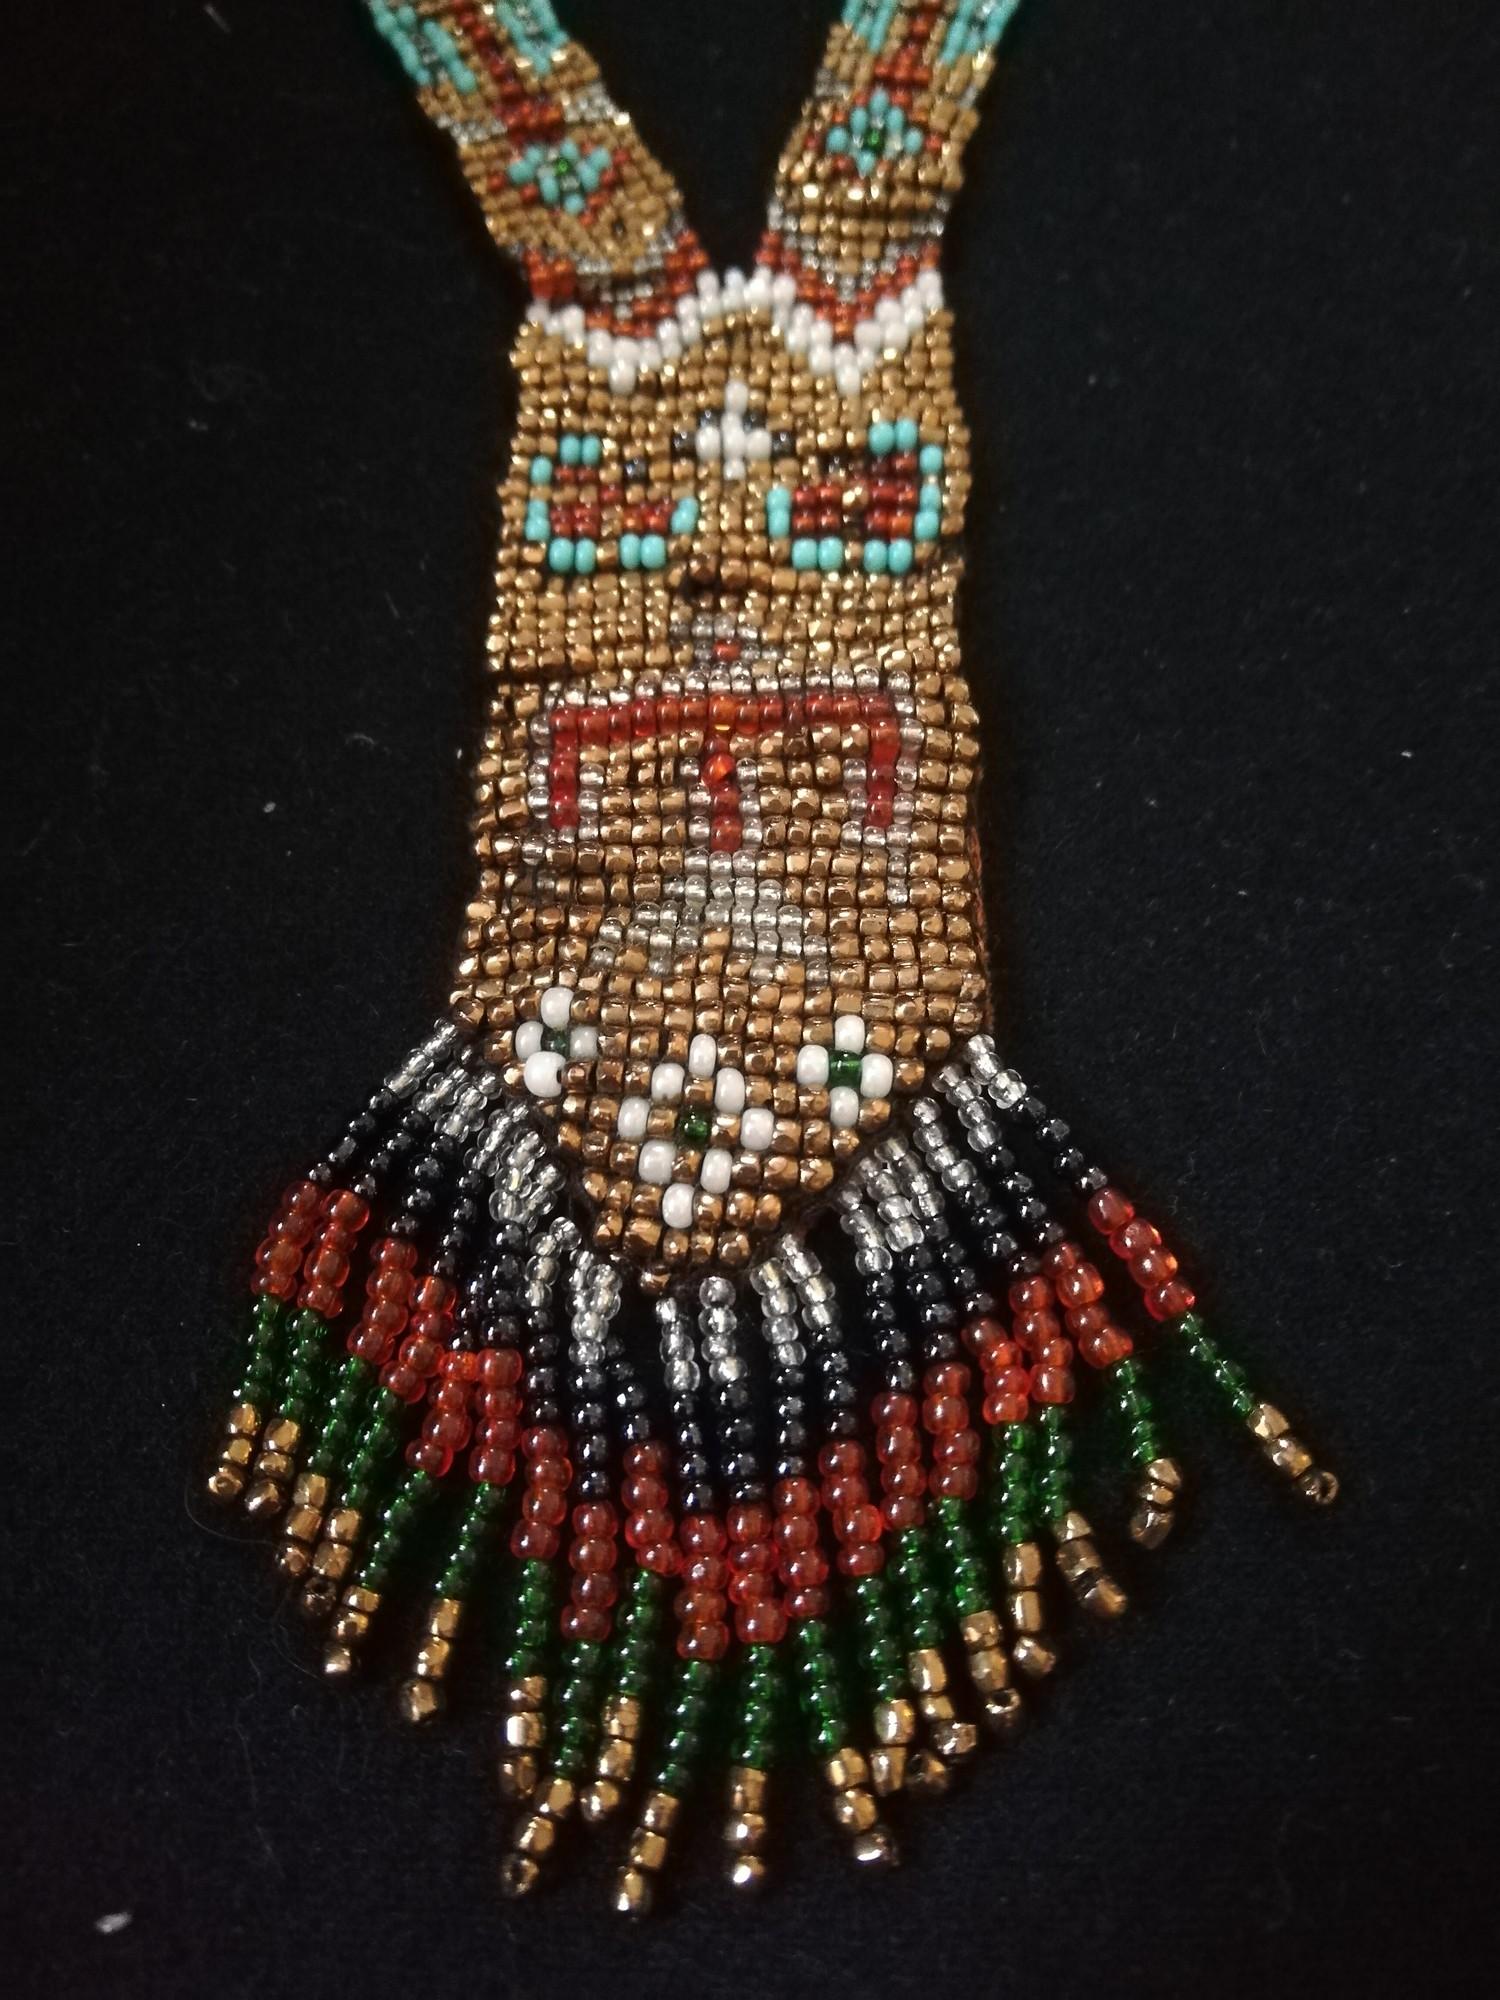 Beadwork necklace with velvet backings -length 17" - Image 2 of 3